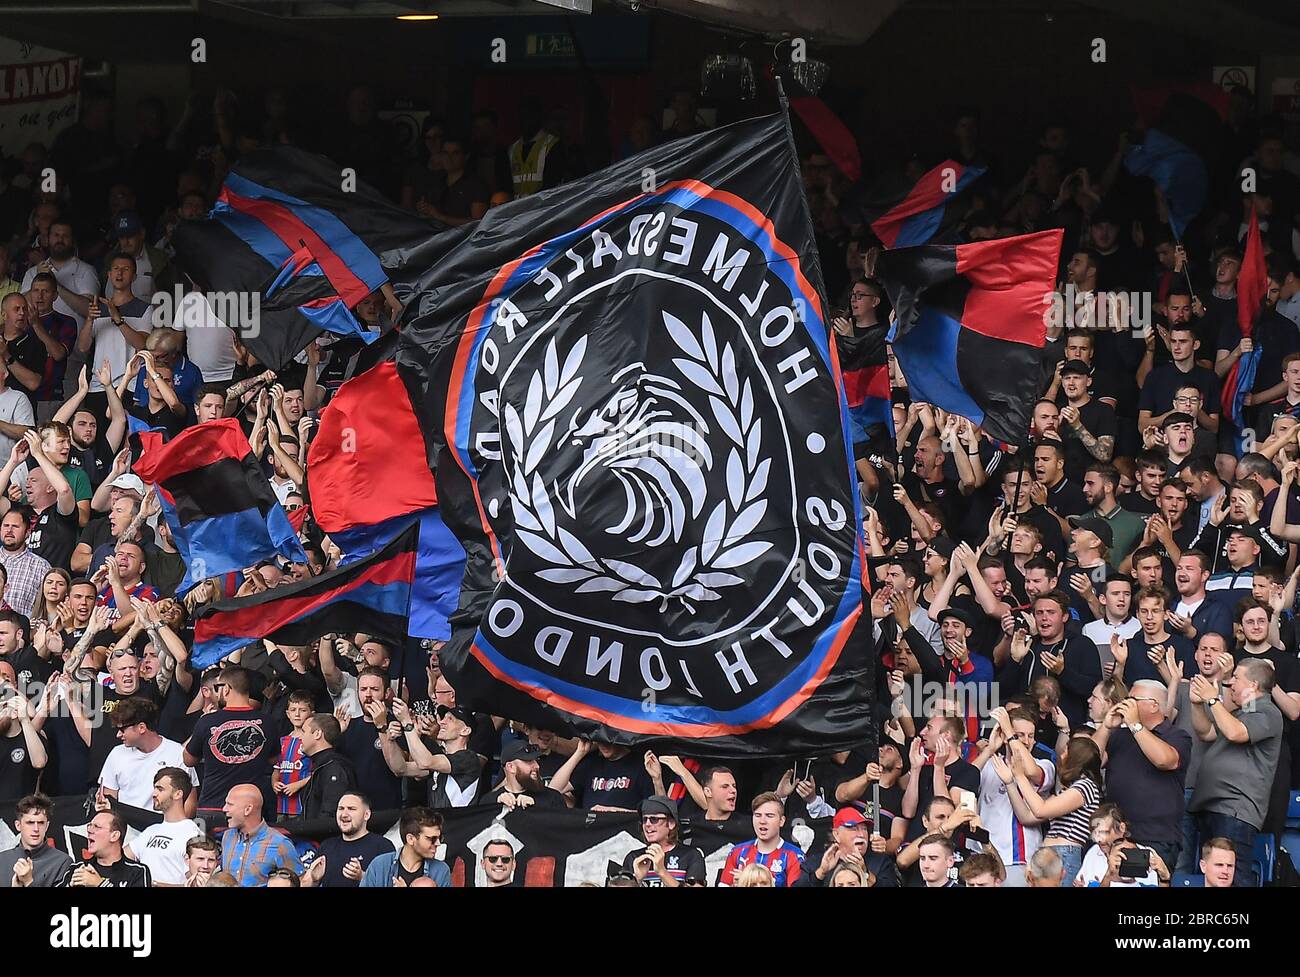 LONDON, ENGLAND - AUGUST 31, 2019: Palace ultras wave flags ahead of  the 2019/20 Premier League game between Crystal Palace FC and Aston Villa FC at Selhurst Park. Stock Photo